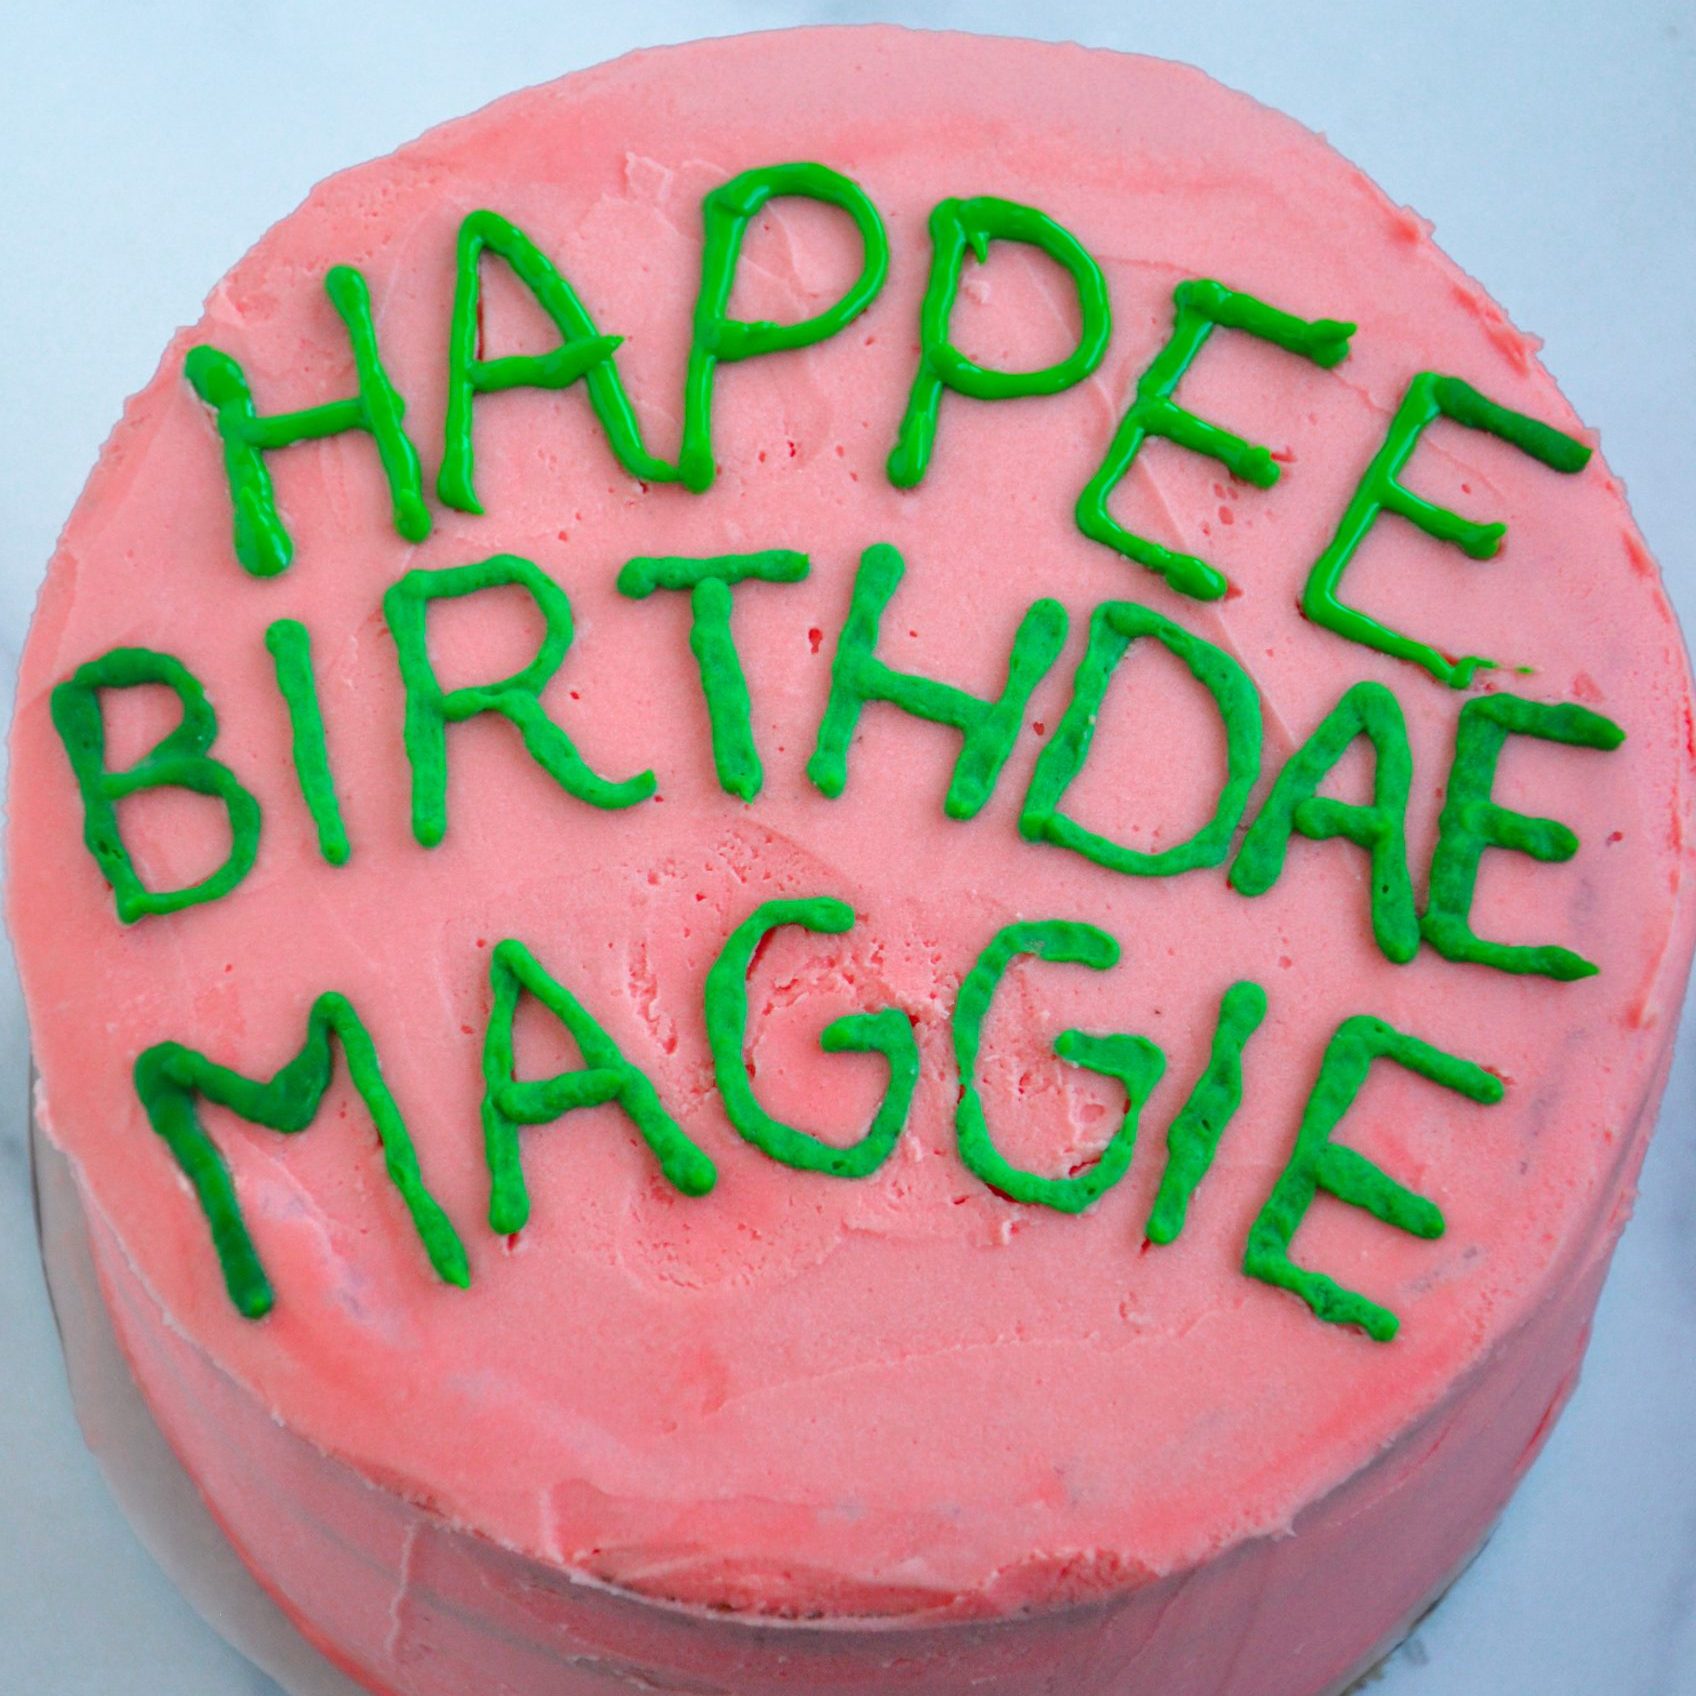 HP Saturday! Ft. Harry's 11th Birthday Cake from Hagrid - Dinner and a Novel